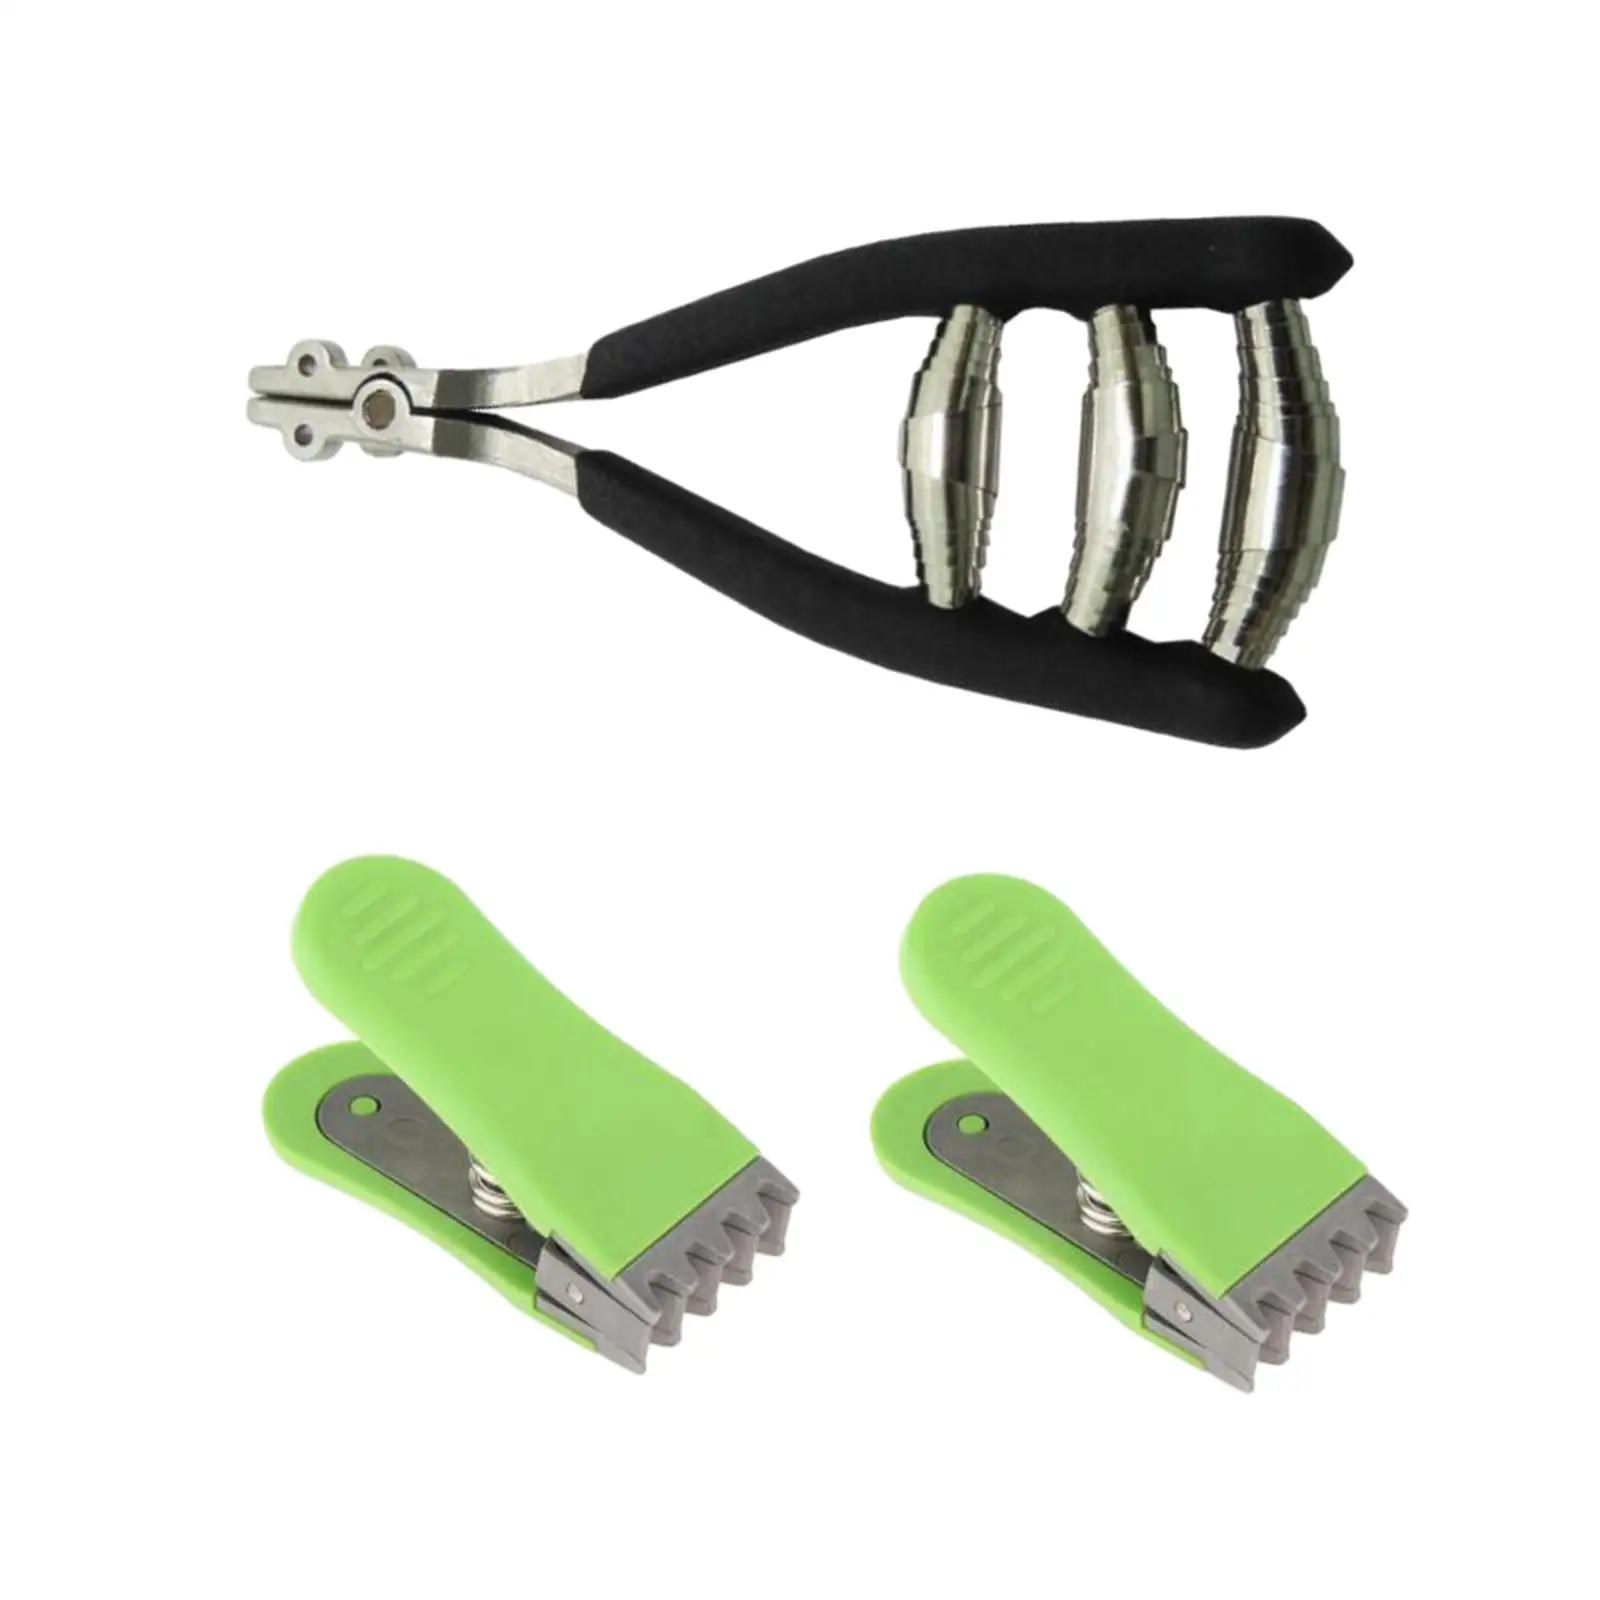 Starting Clamp Portable Accessories Equipment Wide Head with Flying Clip Stringing Clamp for Badminton Racket Squash Racquet